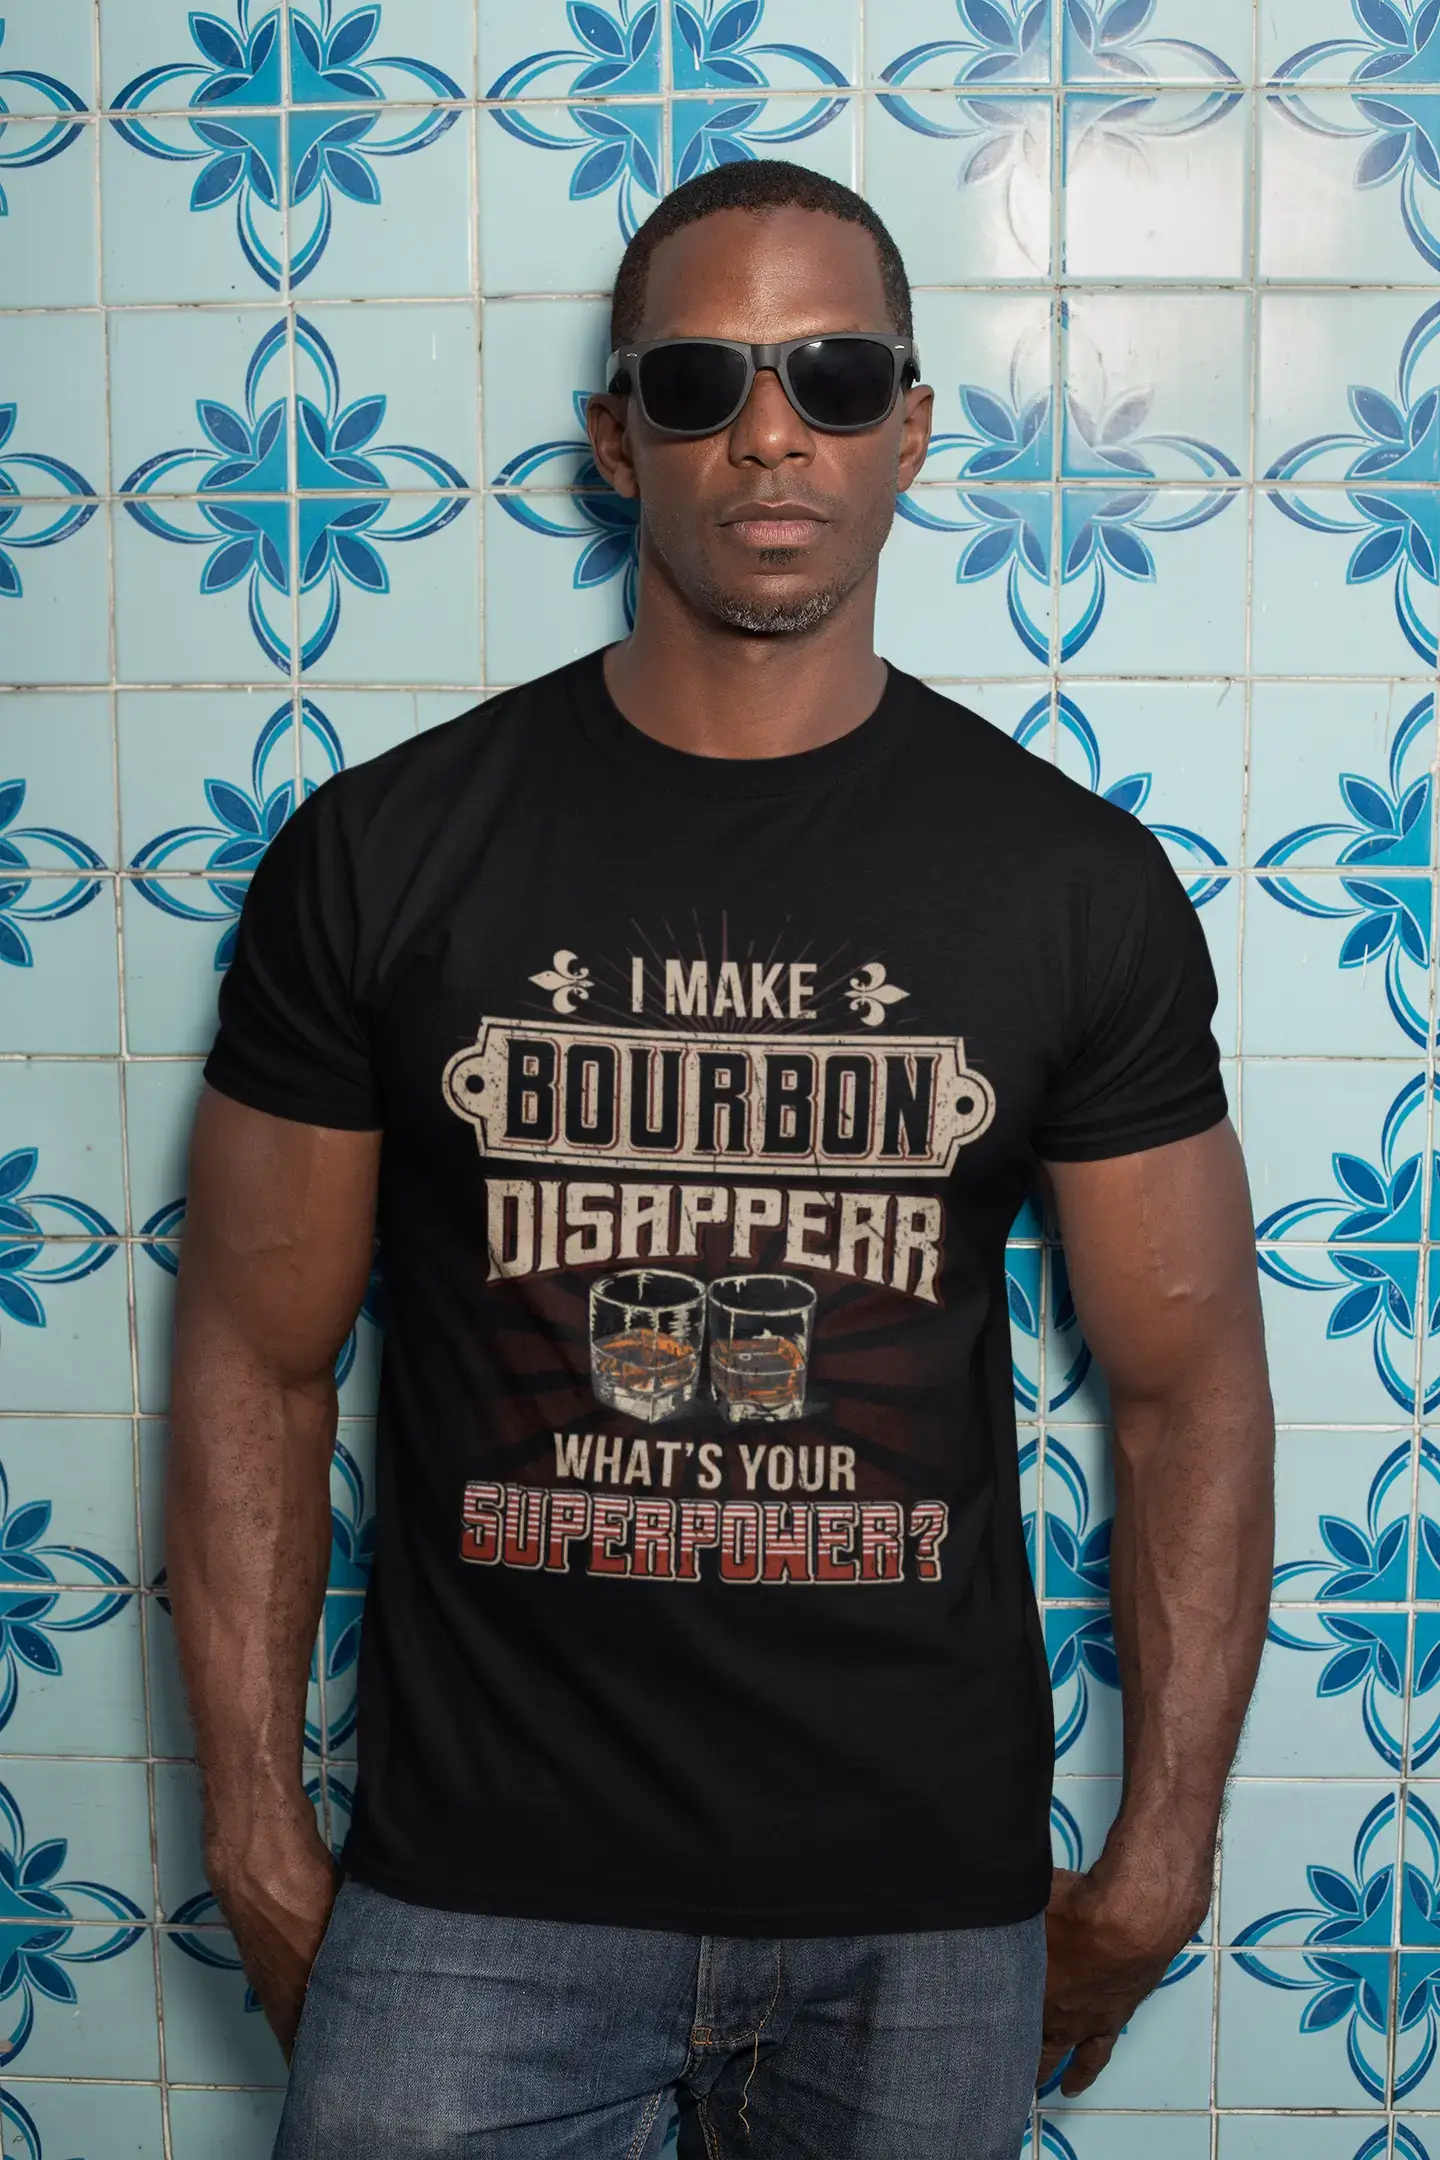 ULTRABASIC Men's T-Shirt I Make Bourbon Disappear - What's Your Superpower - Alcohol Lover Drinking Tee Shirt